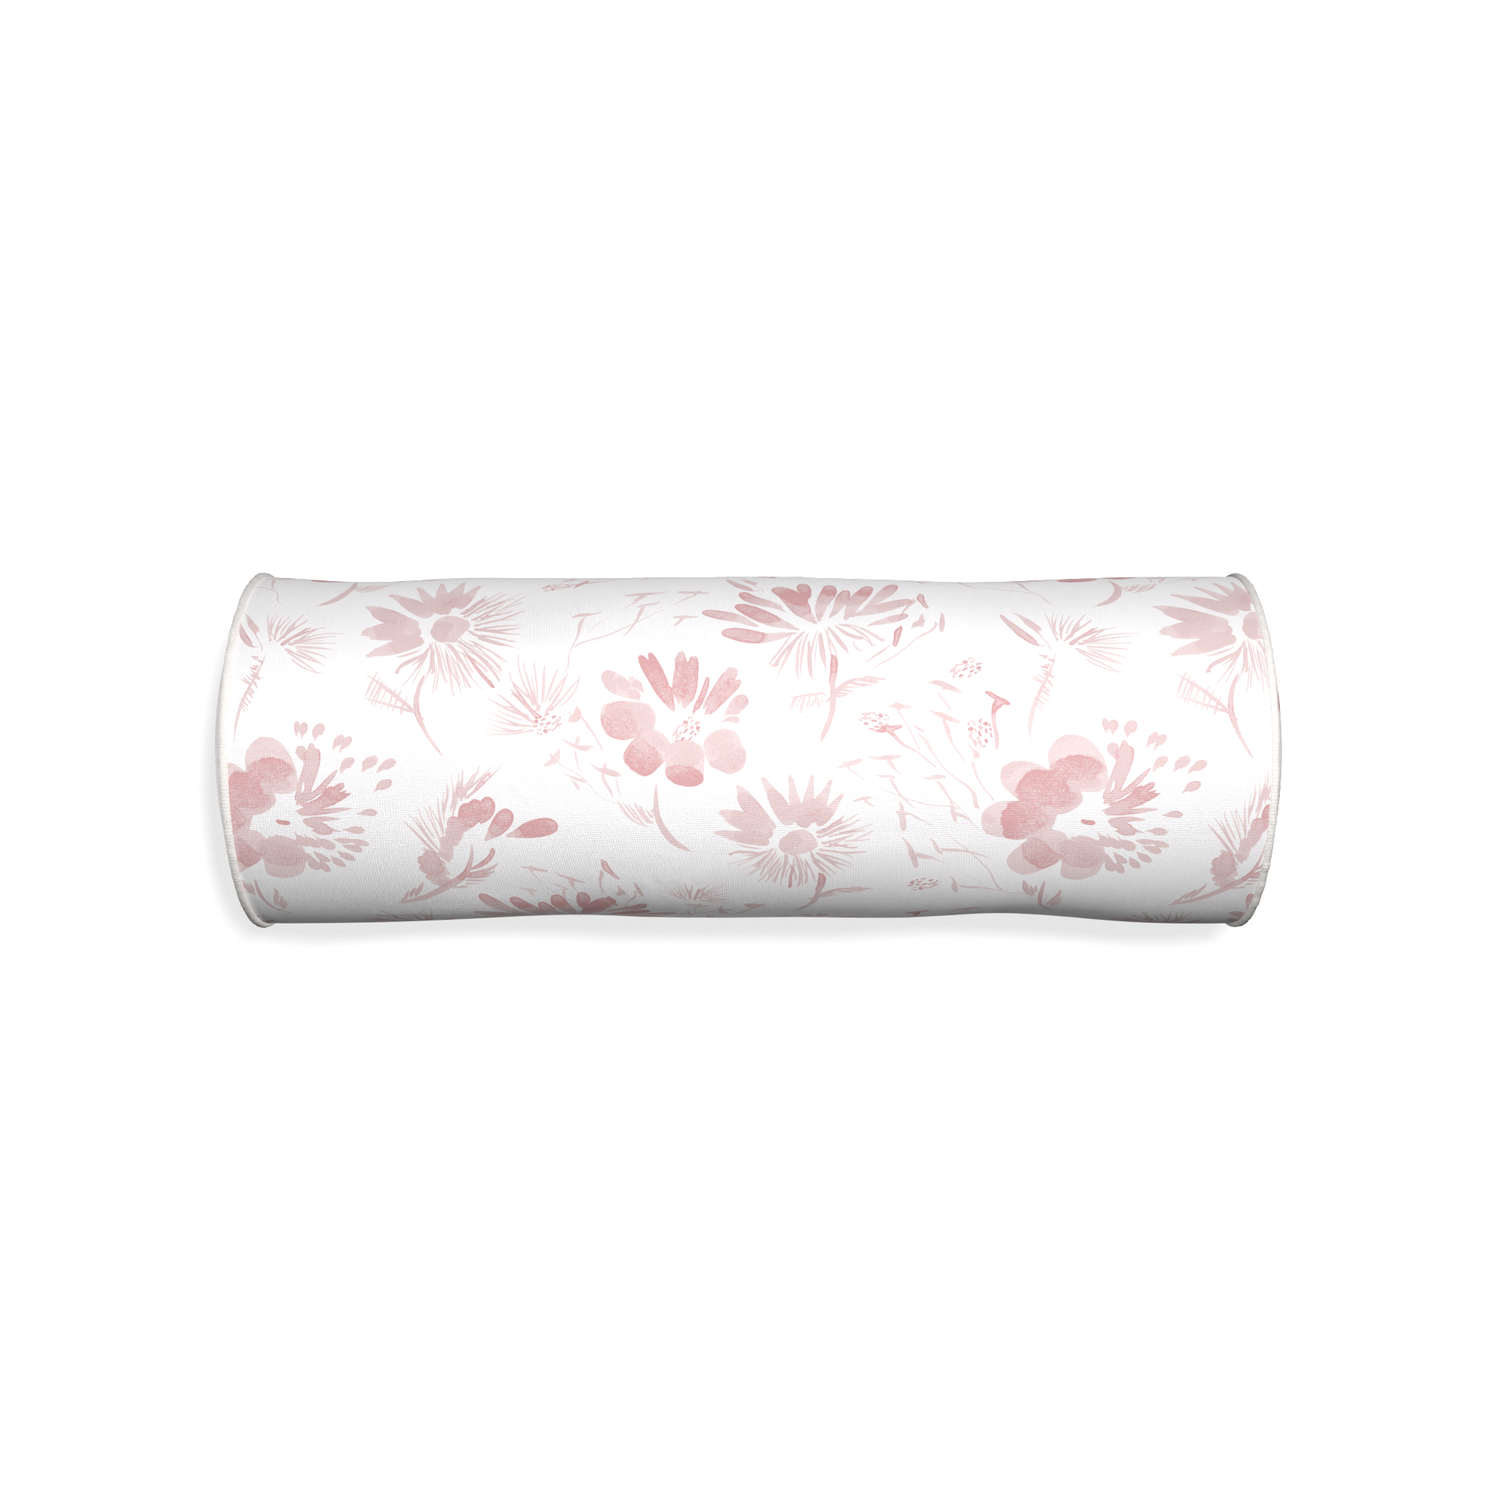 Bolster blake custom pink floralpillow with snow piping on white background